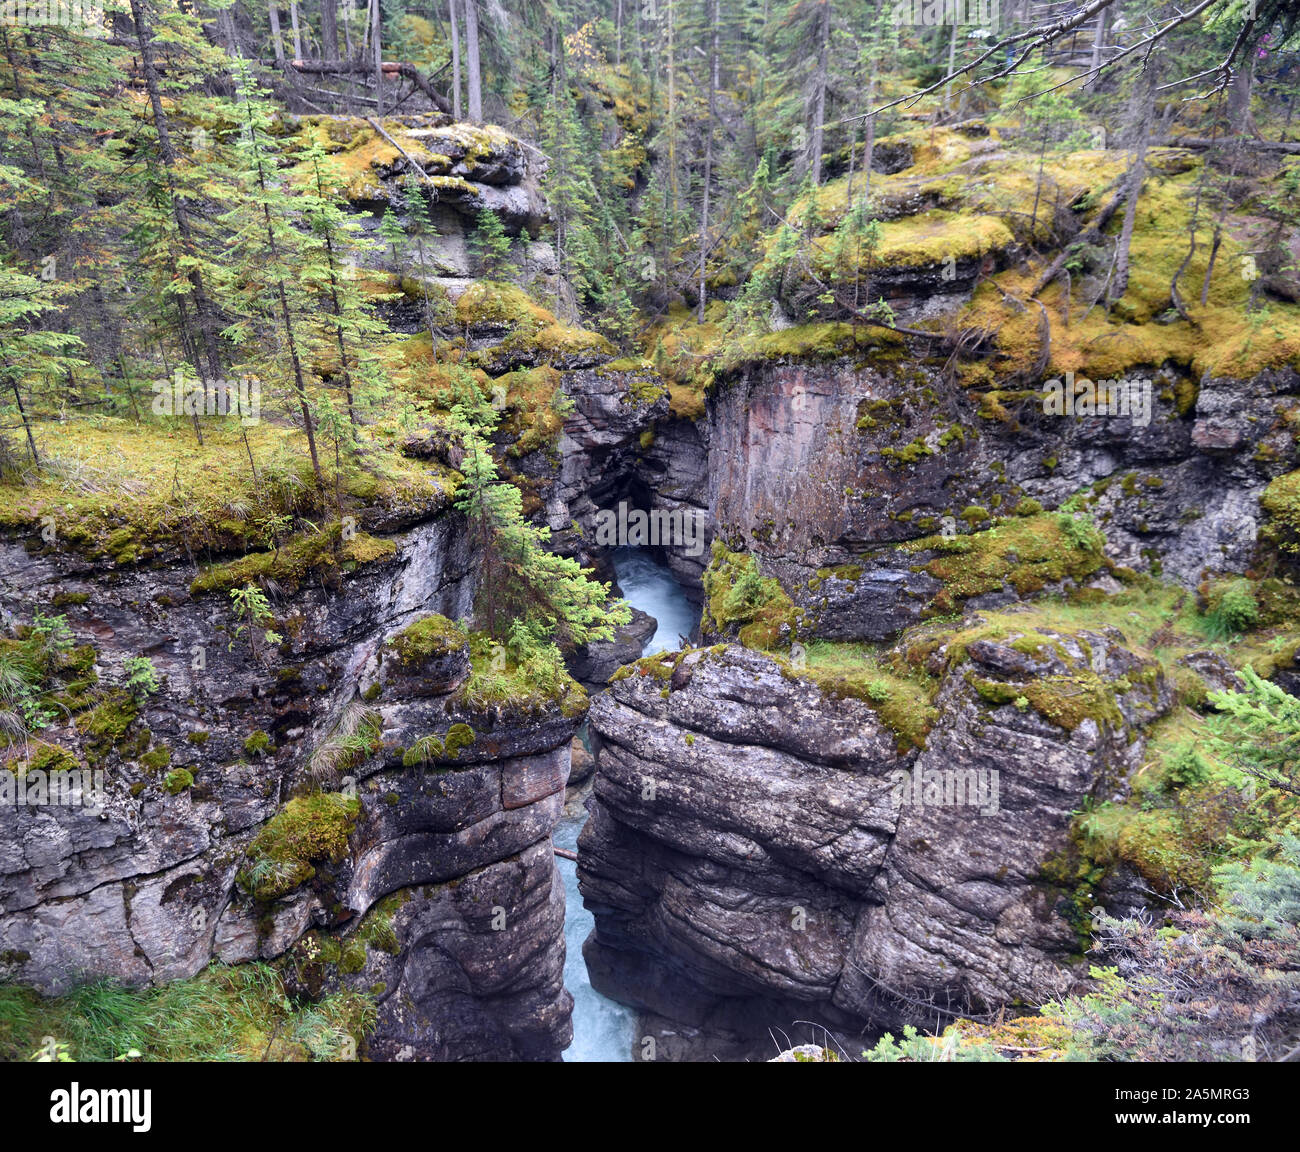 The Maligne River runs through the Maligne Canyon at the start of the Maligne Valley.  The canyon has its own damp, spray filled microclimate where mo Stock Photo